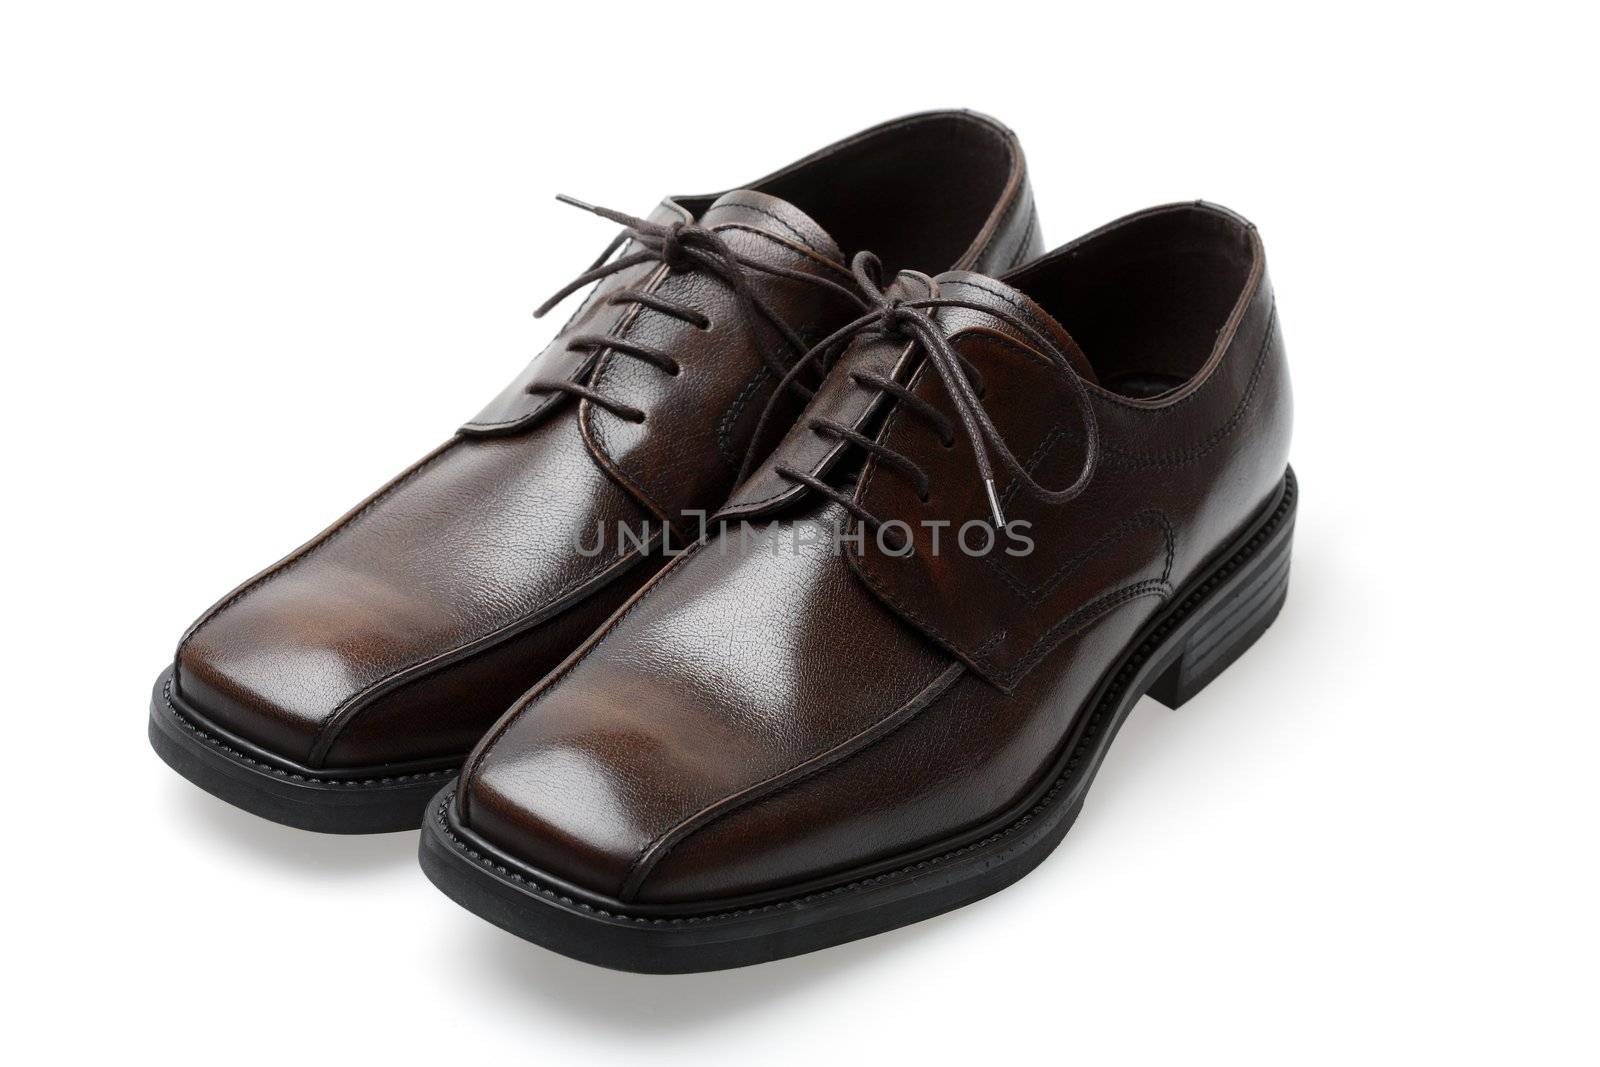 New leather shoes by Stocksnapper